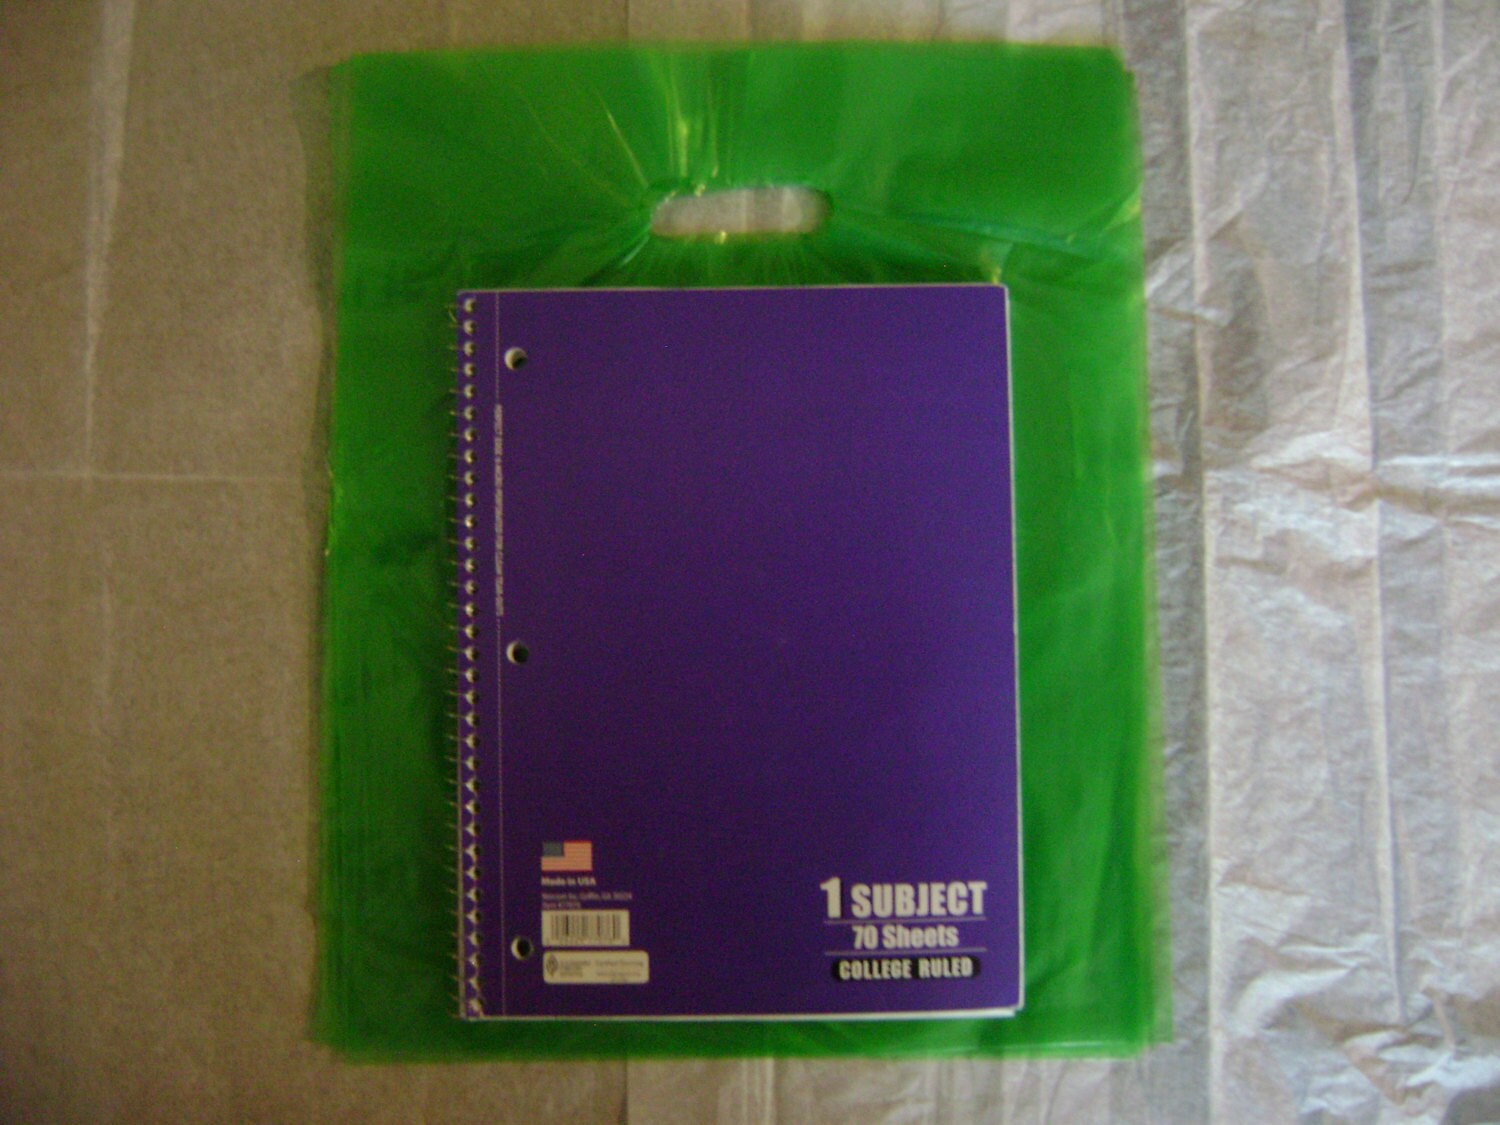 200   12" x 15" LIME-GREEN GLOSSY Low-Density Plastic Merchandise or Party Bags 